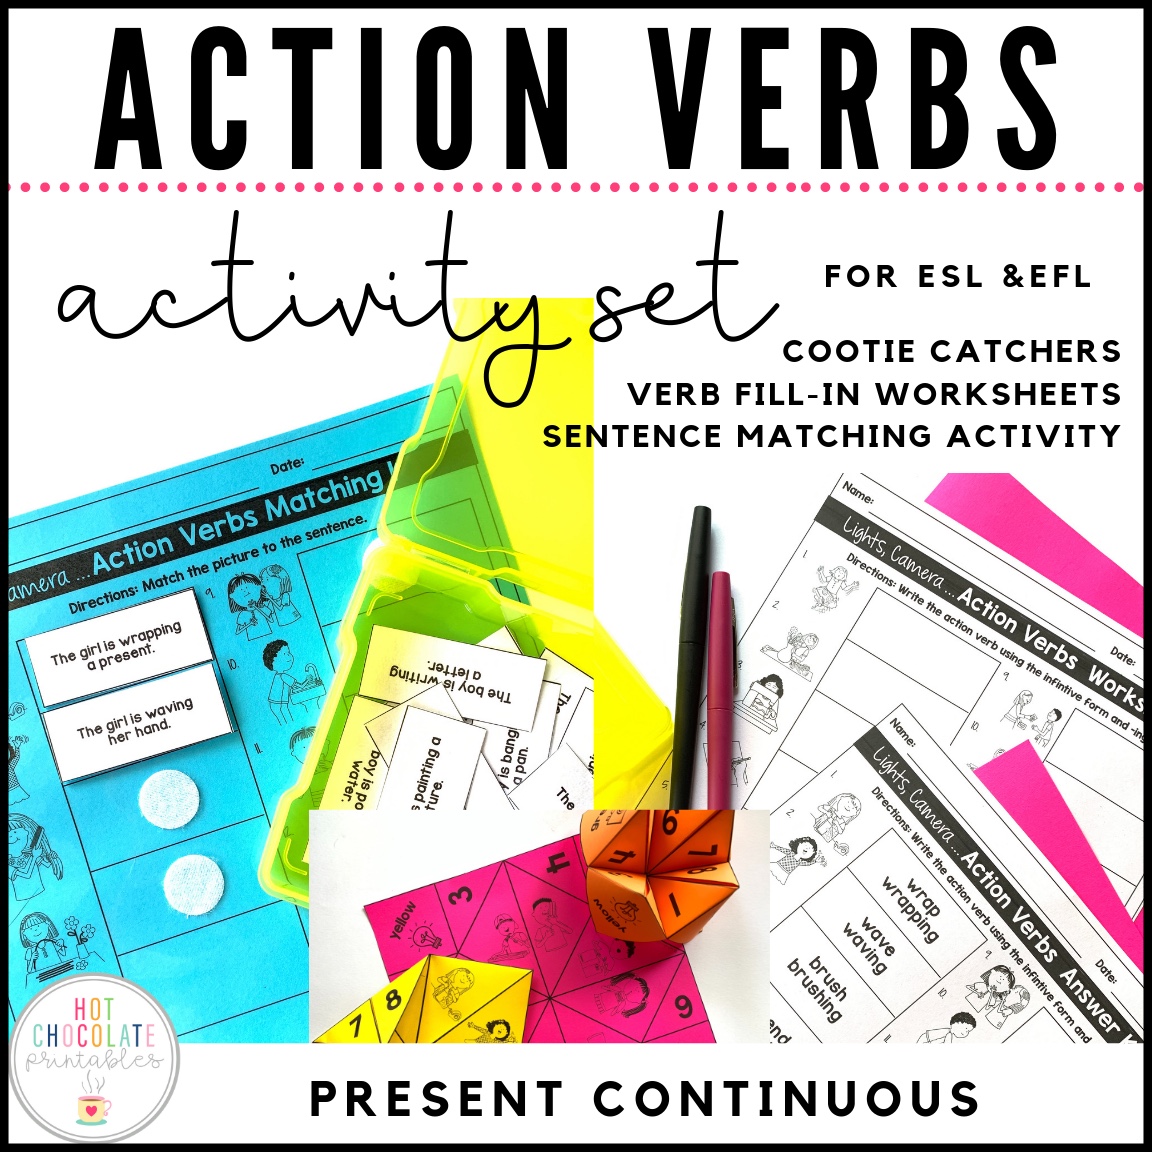 Help students master using action verbs in complete sentences